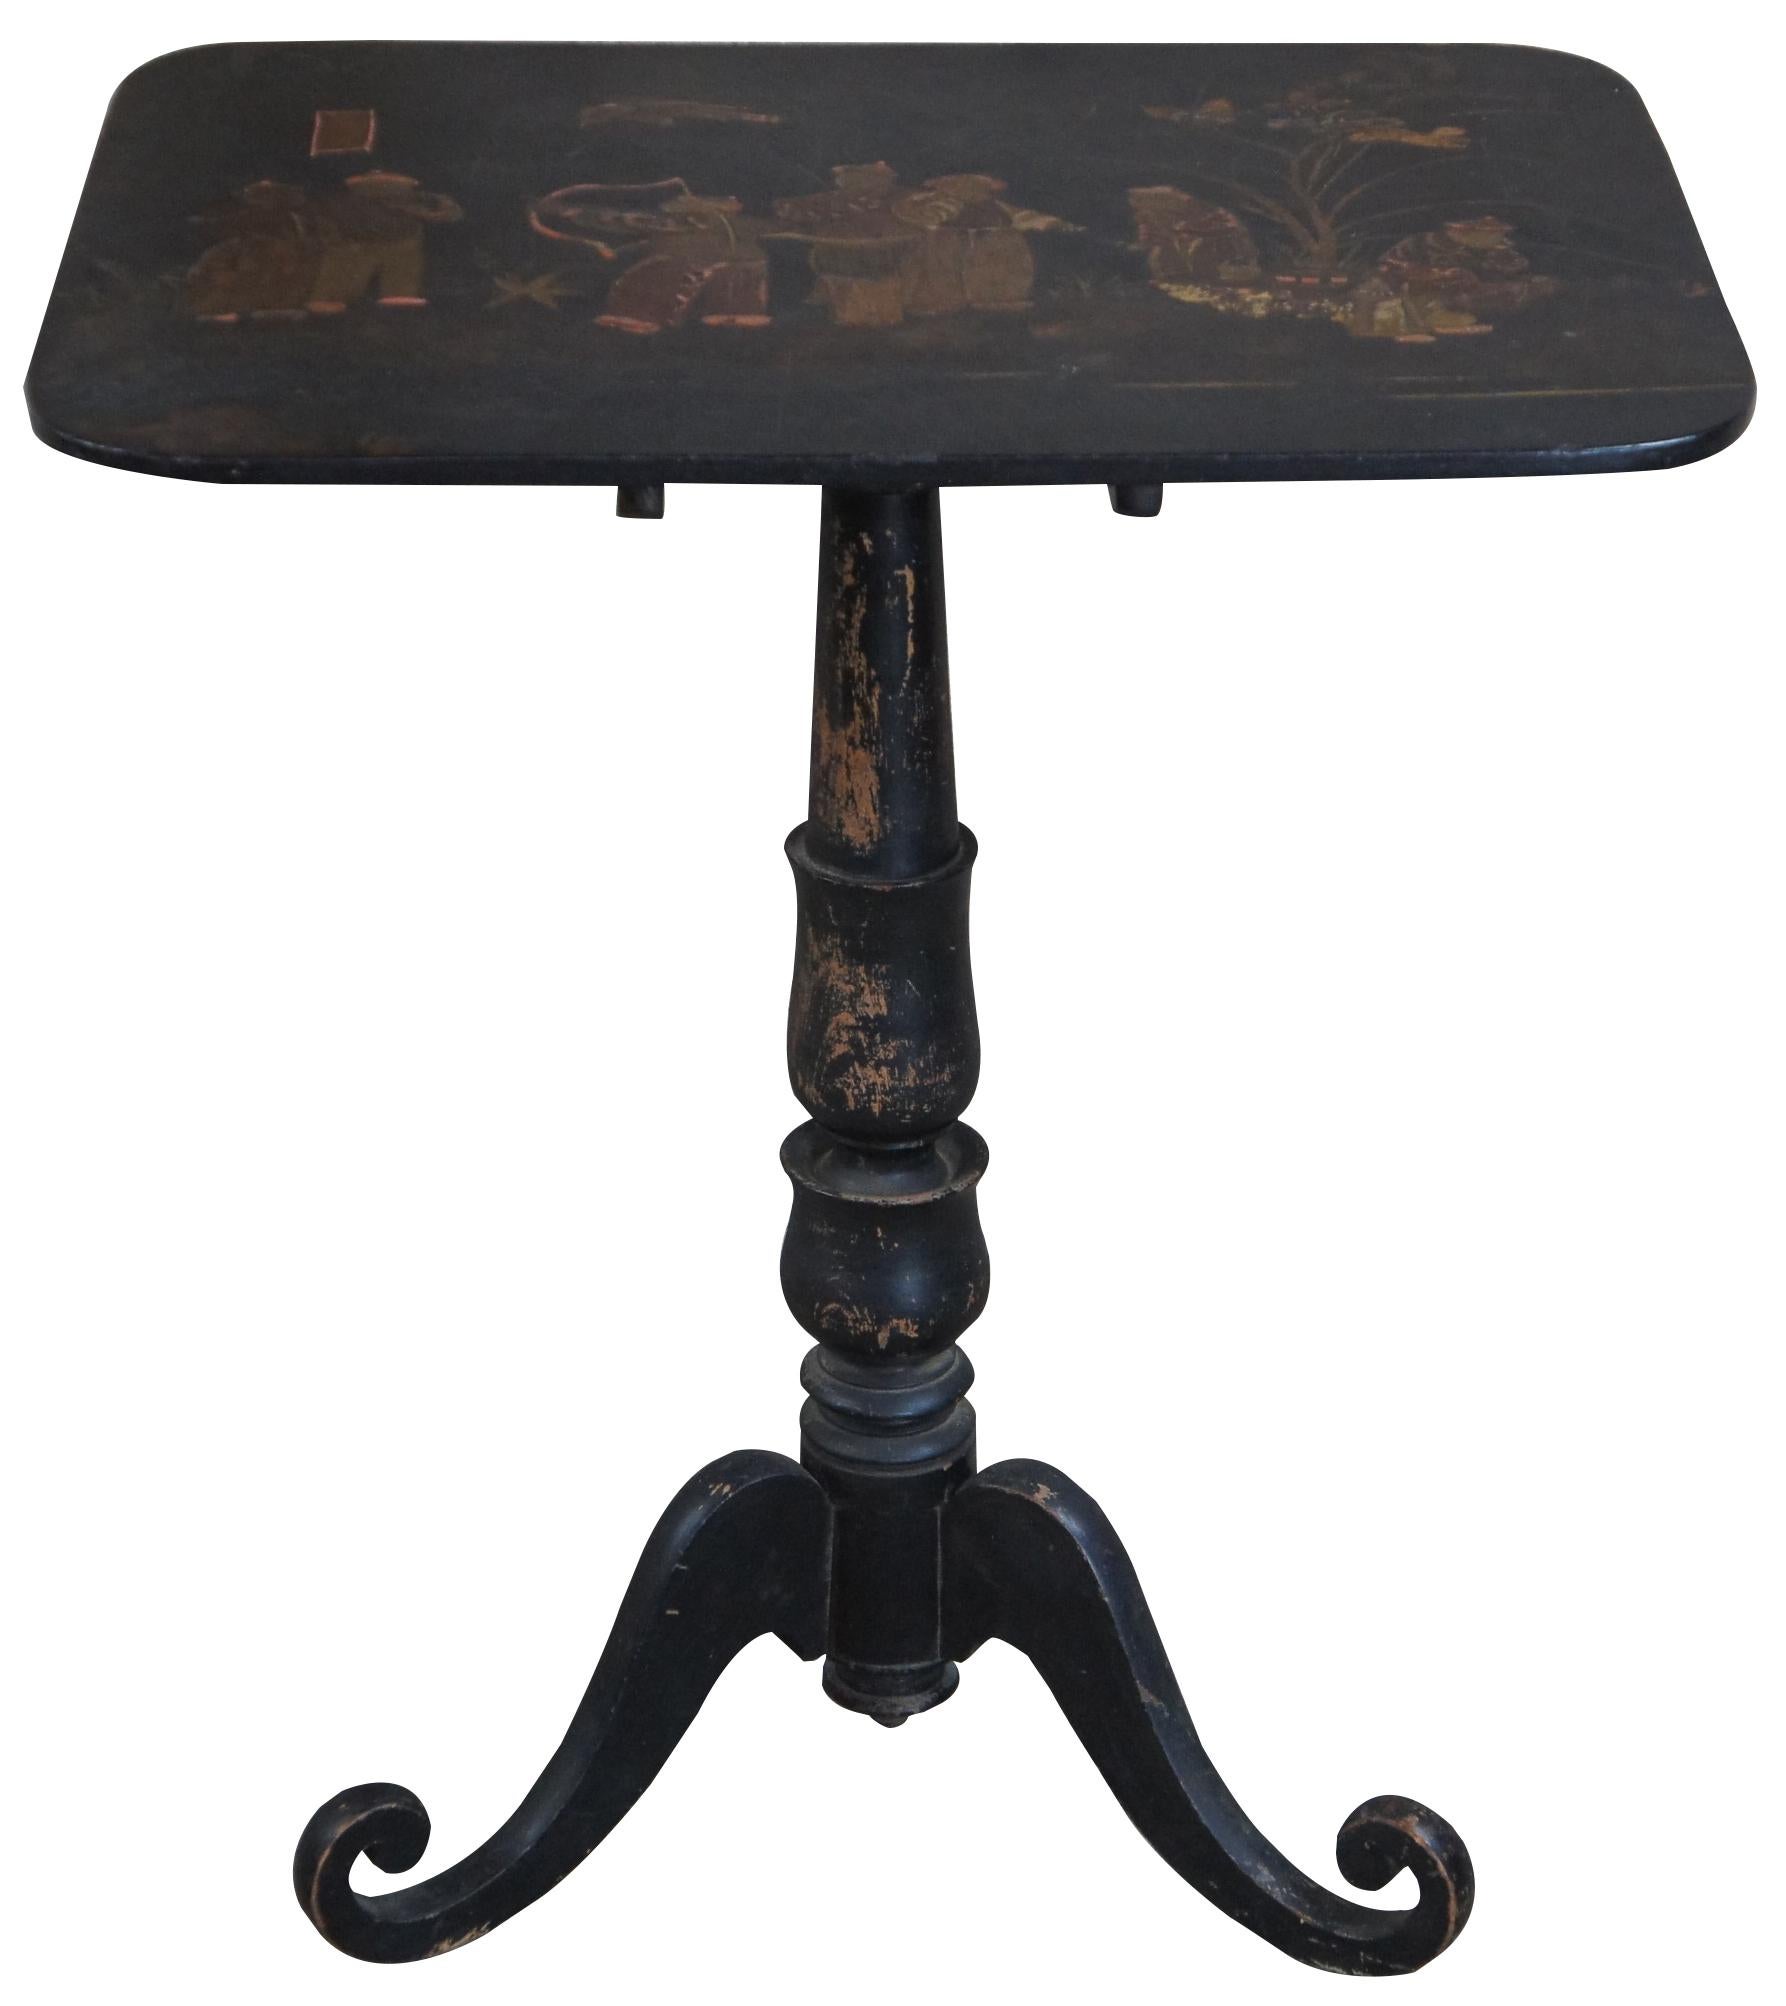 Antique Regency jappanned tilt top table. Features a distressed back finish with figures along the table top. Depicts a carnival scene with musicians, smokers and bow and arrow. Measure: 28